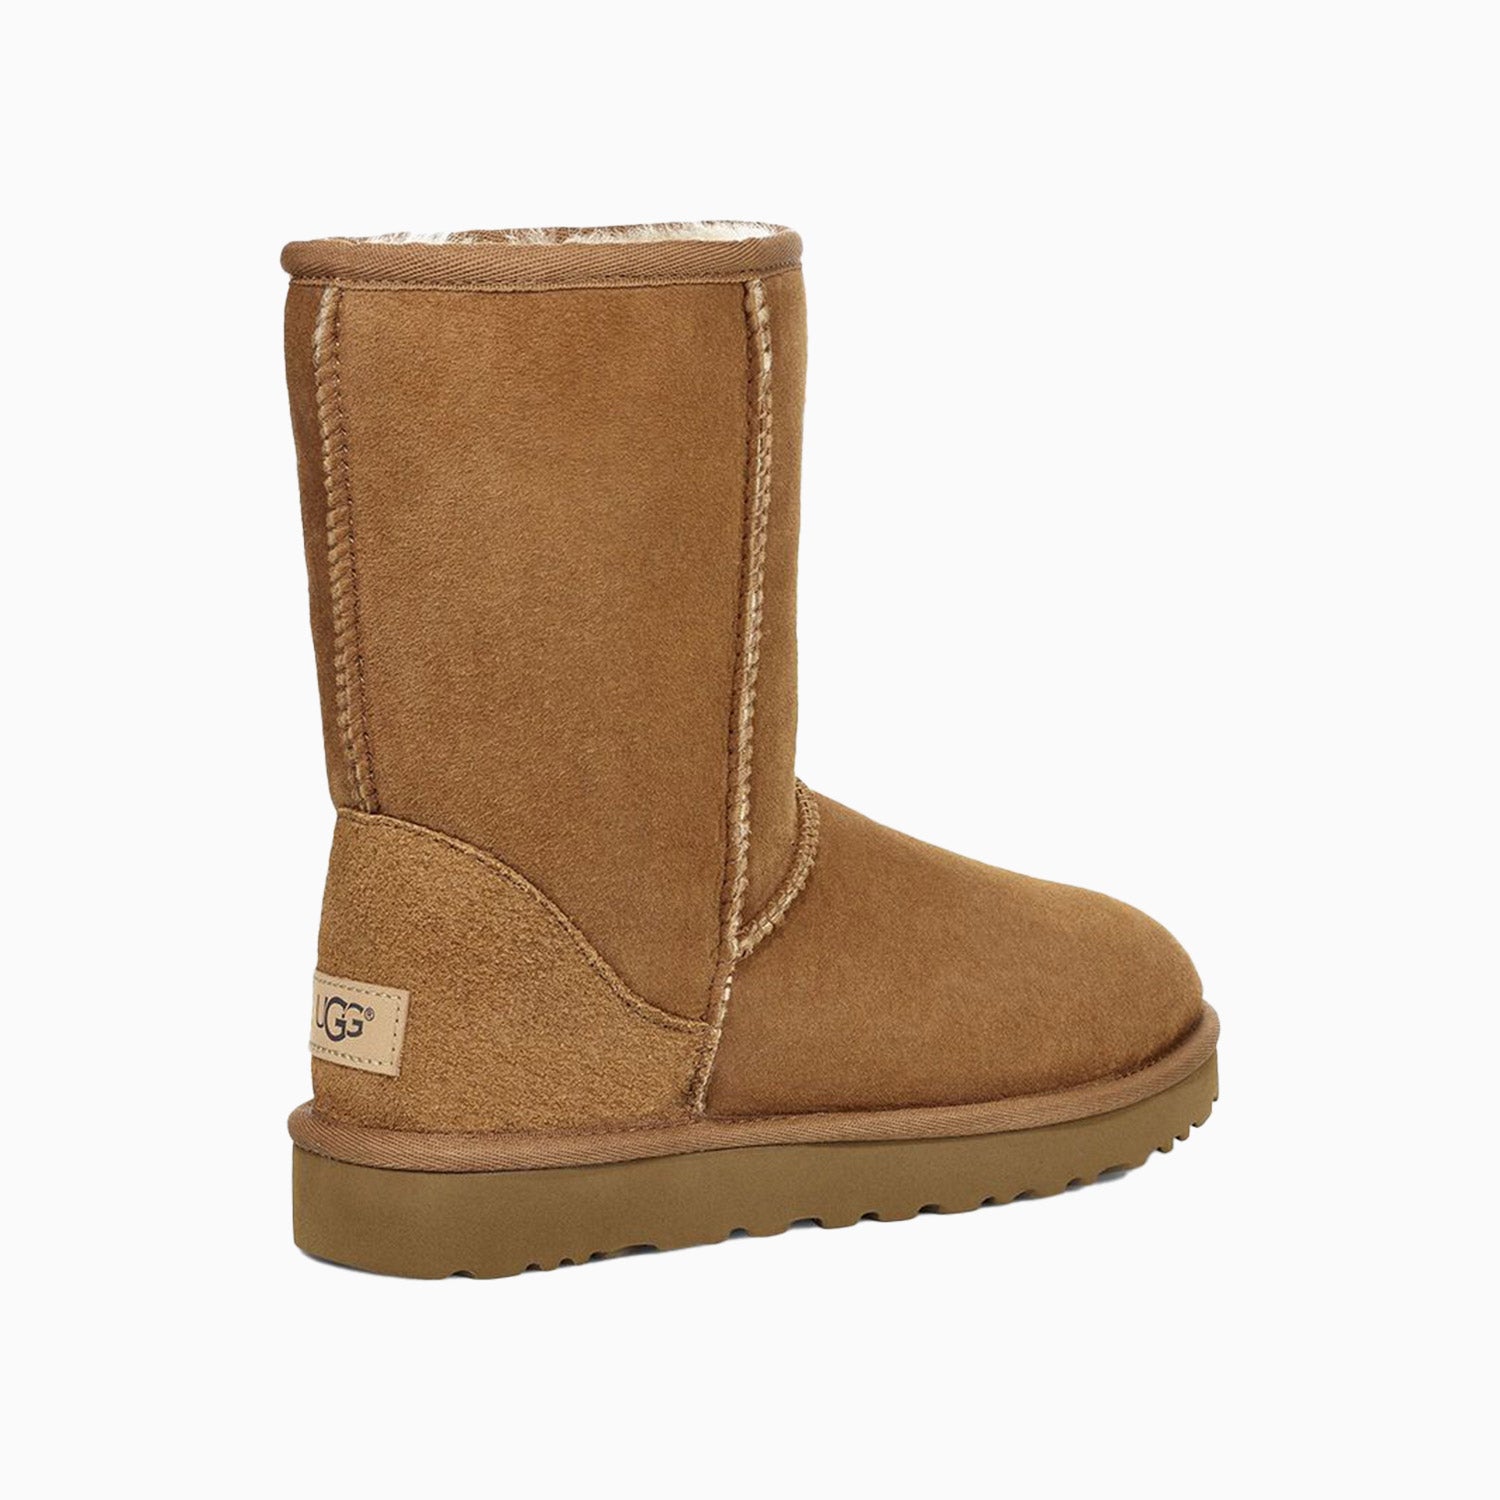 UGG Womens Classic Short II Boot - Color: CHESTNUT, BLACK, NAVY - Tops and Bottoms USA -